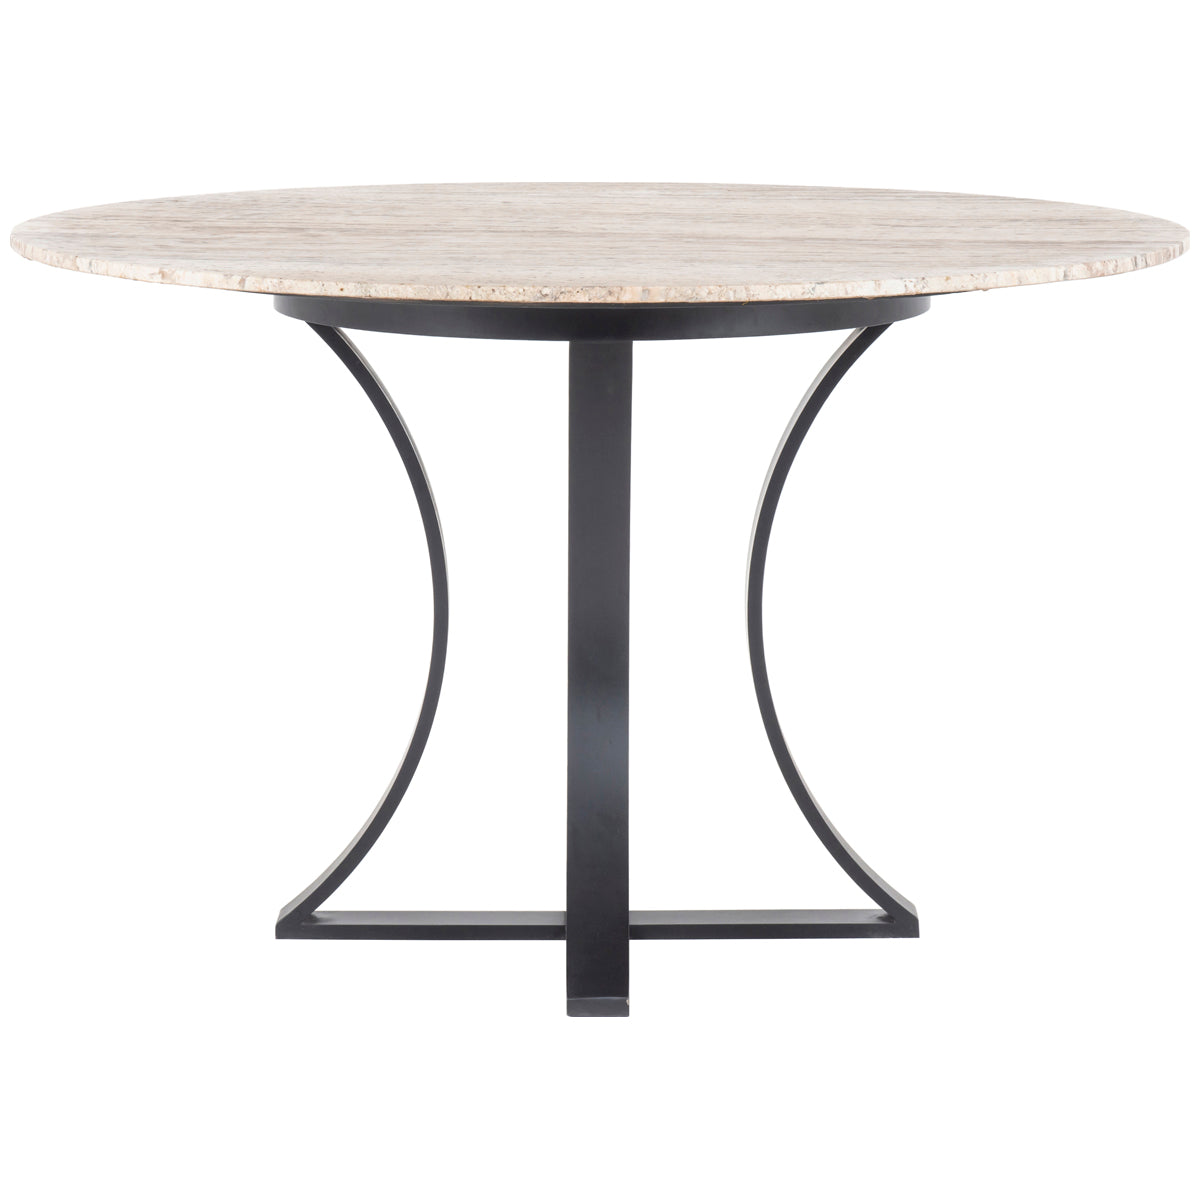 Four Hands Rockwell Gage Travertine Dining Table